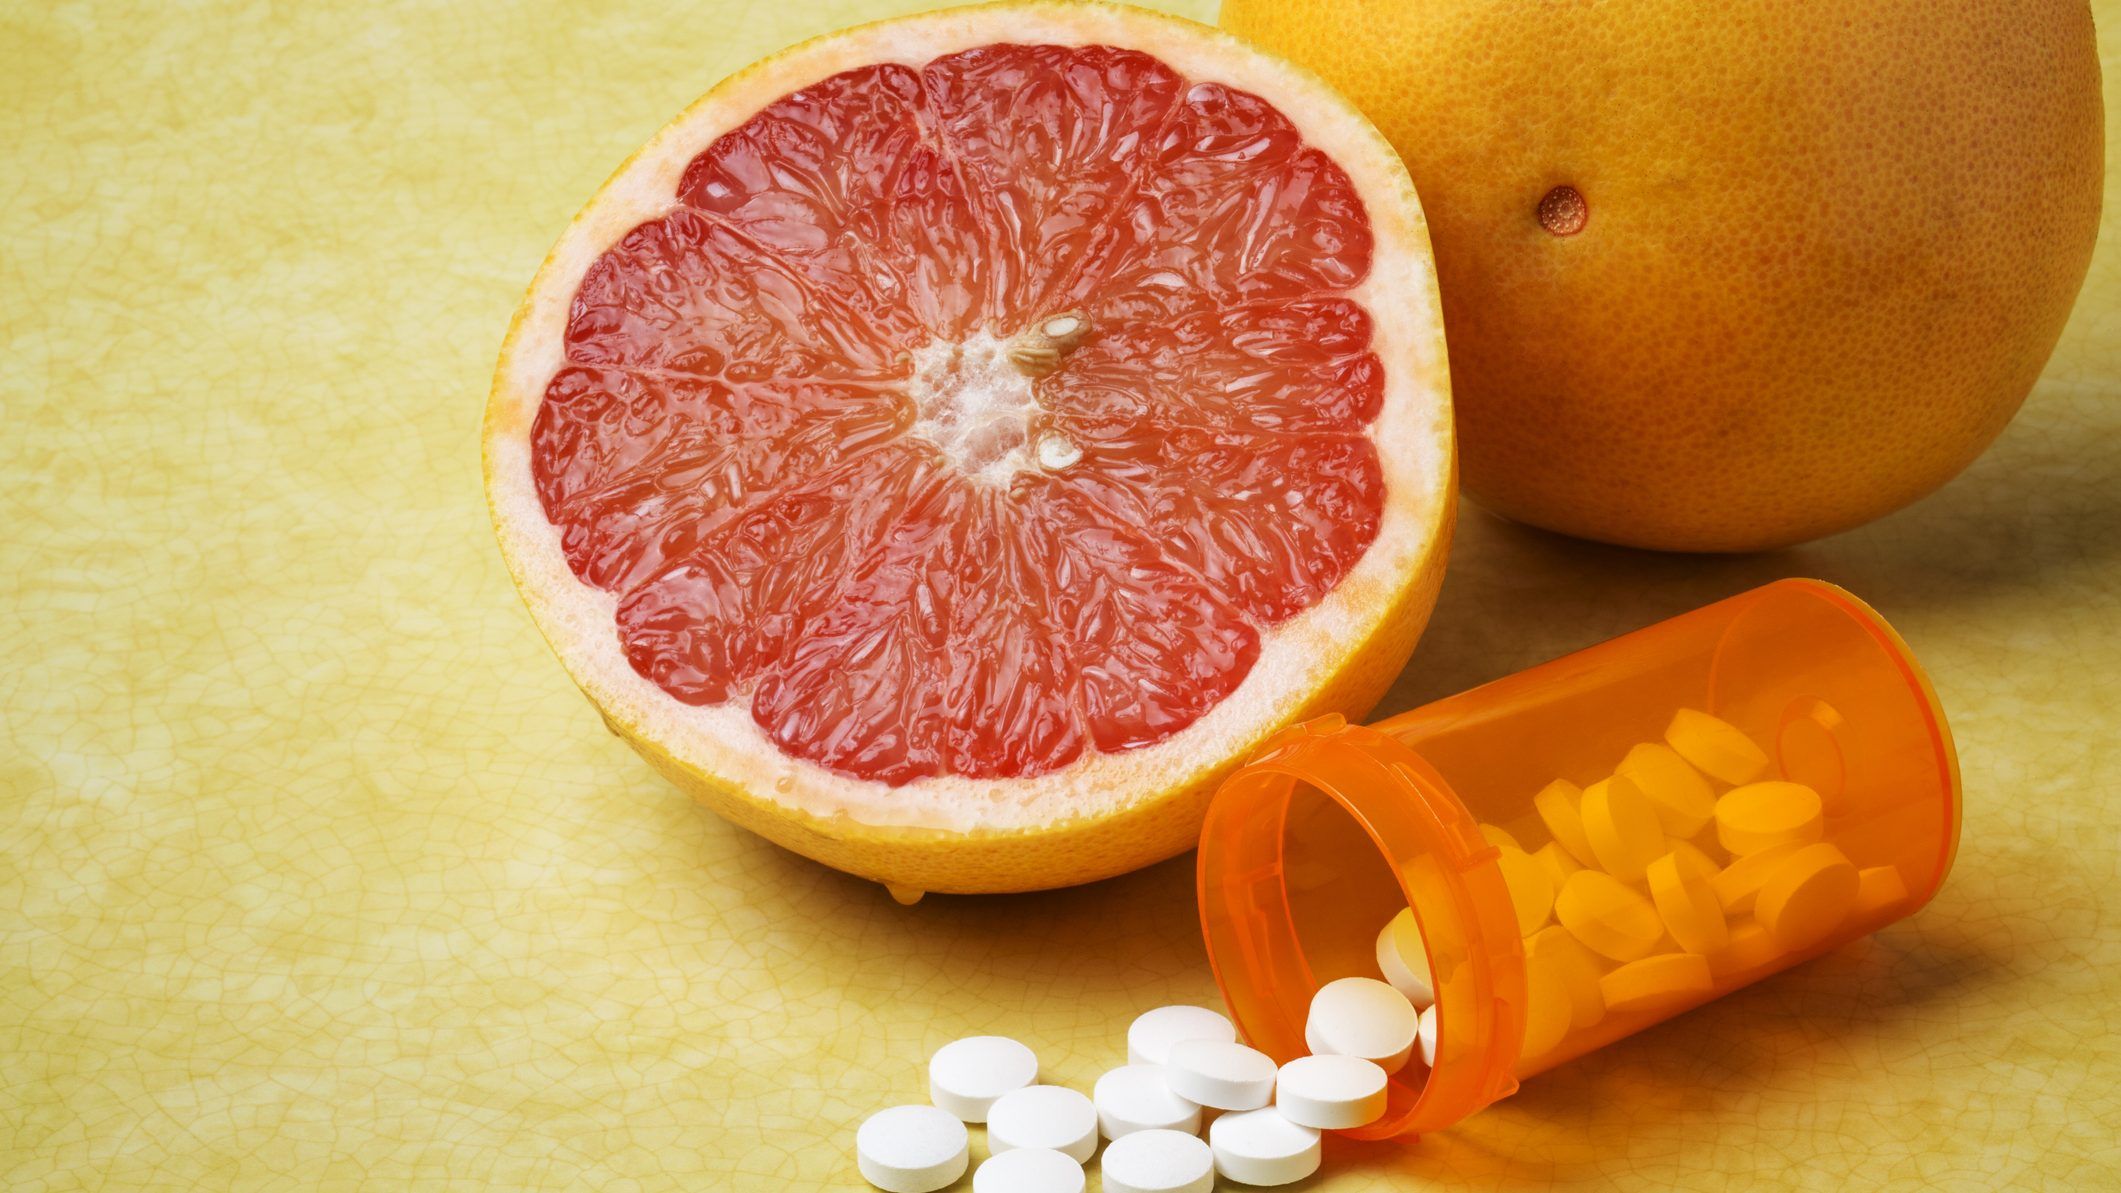 Grapefruit can cause the side effects of medications to intensify. GETTY